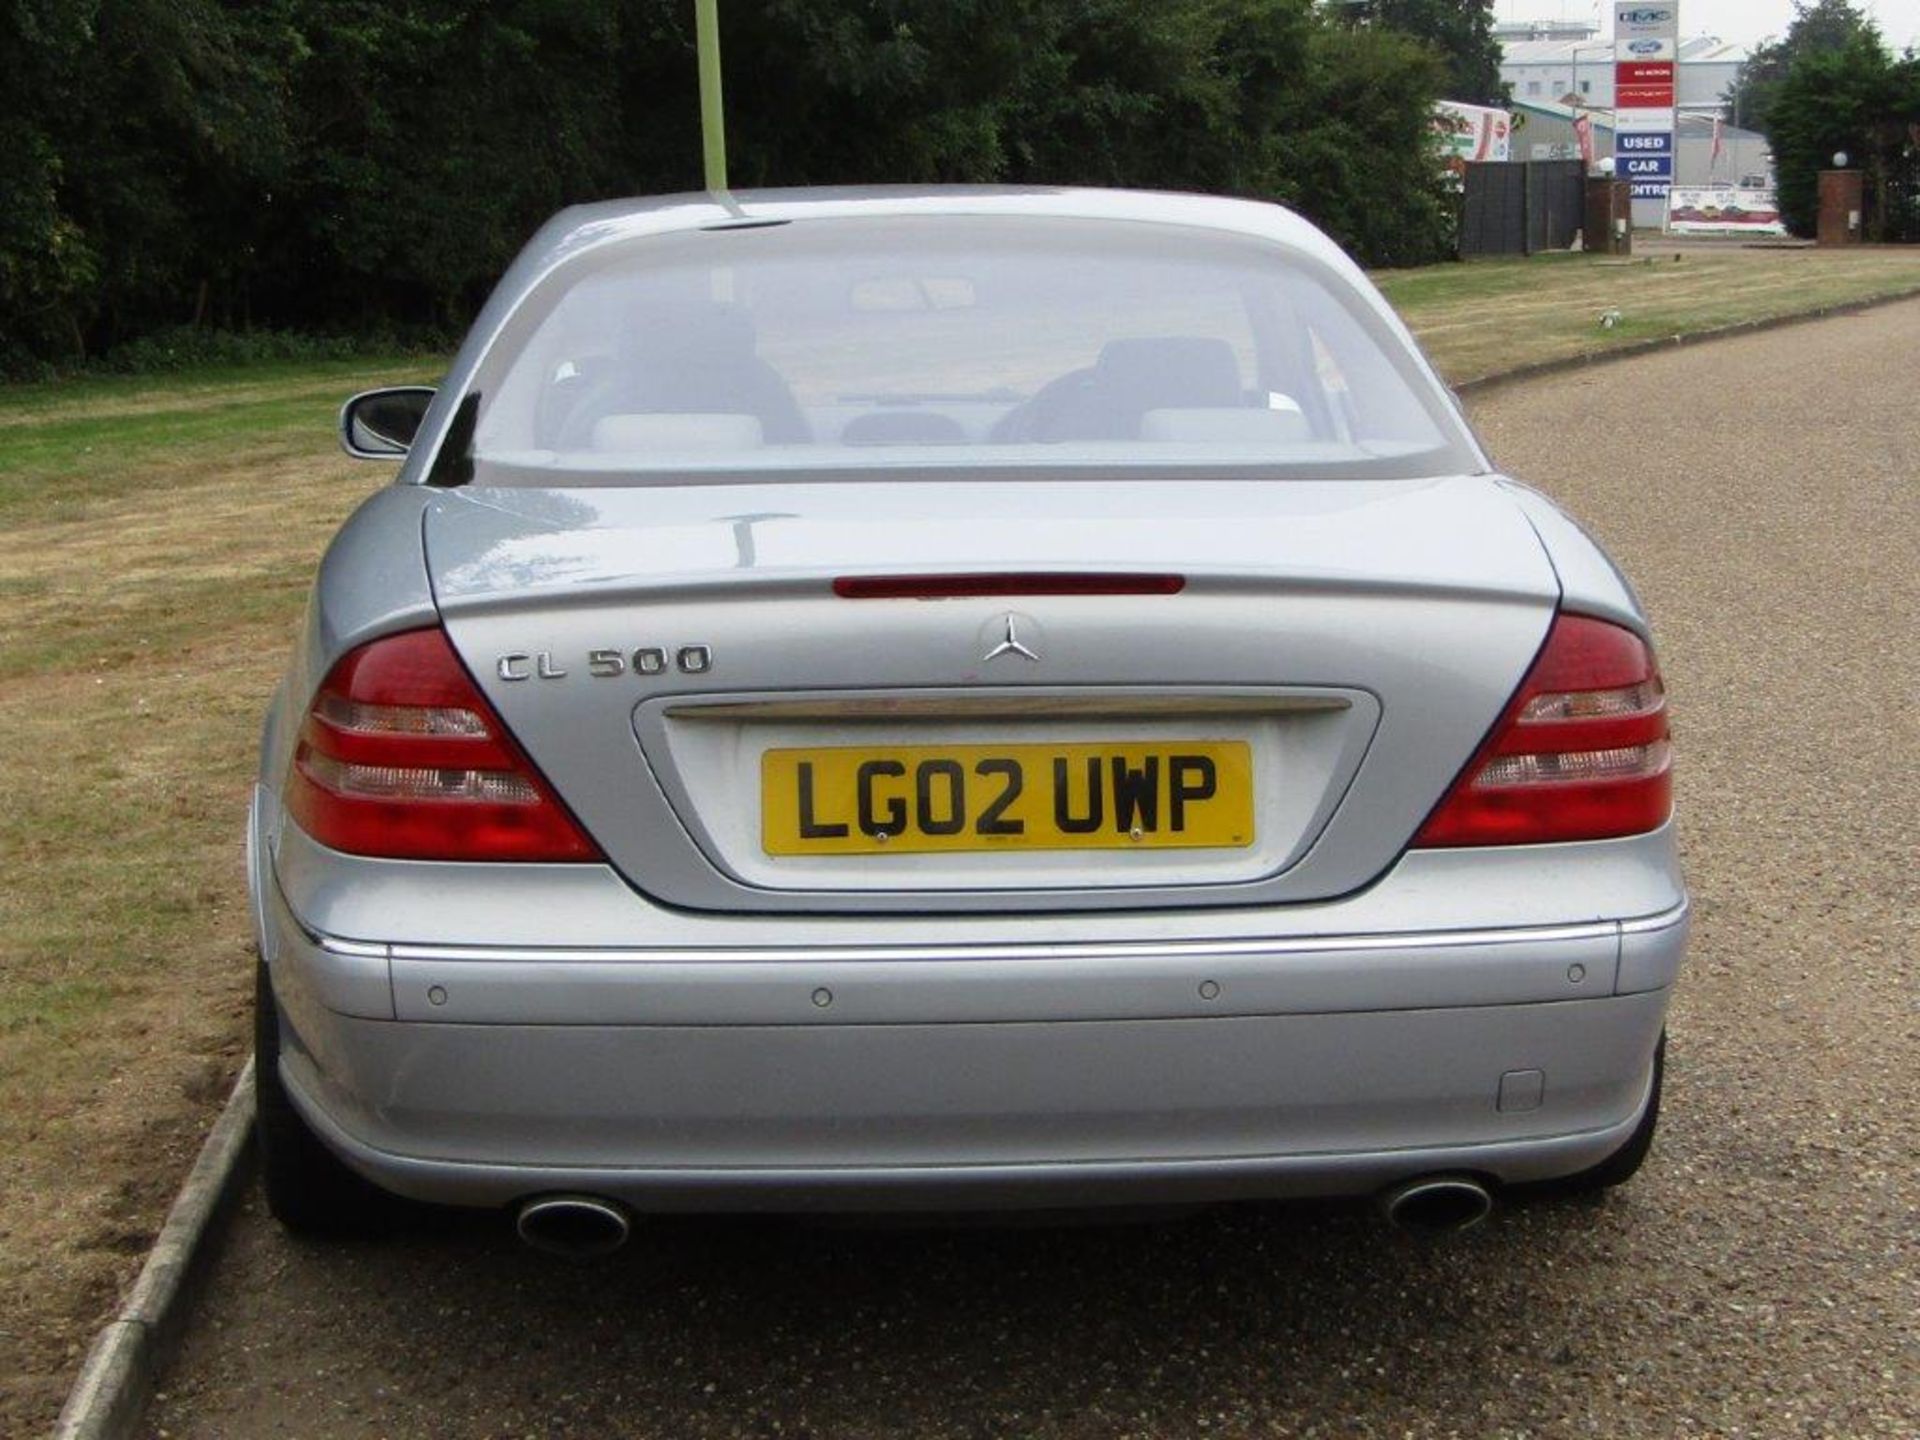 2002 Mercedes CL500 Coupe - Image 5 of 12